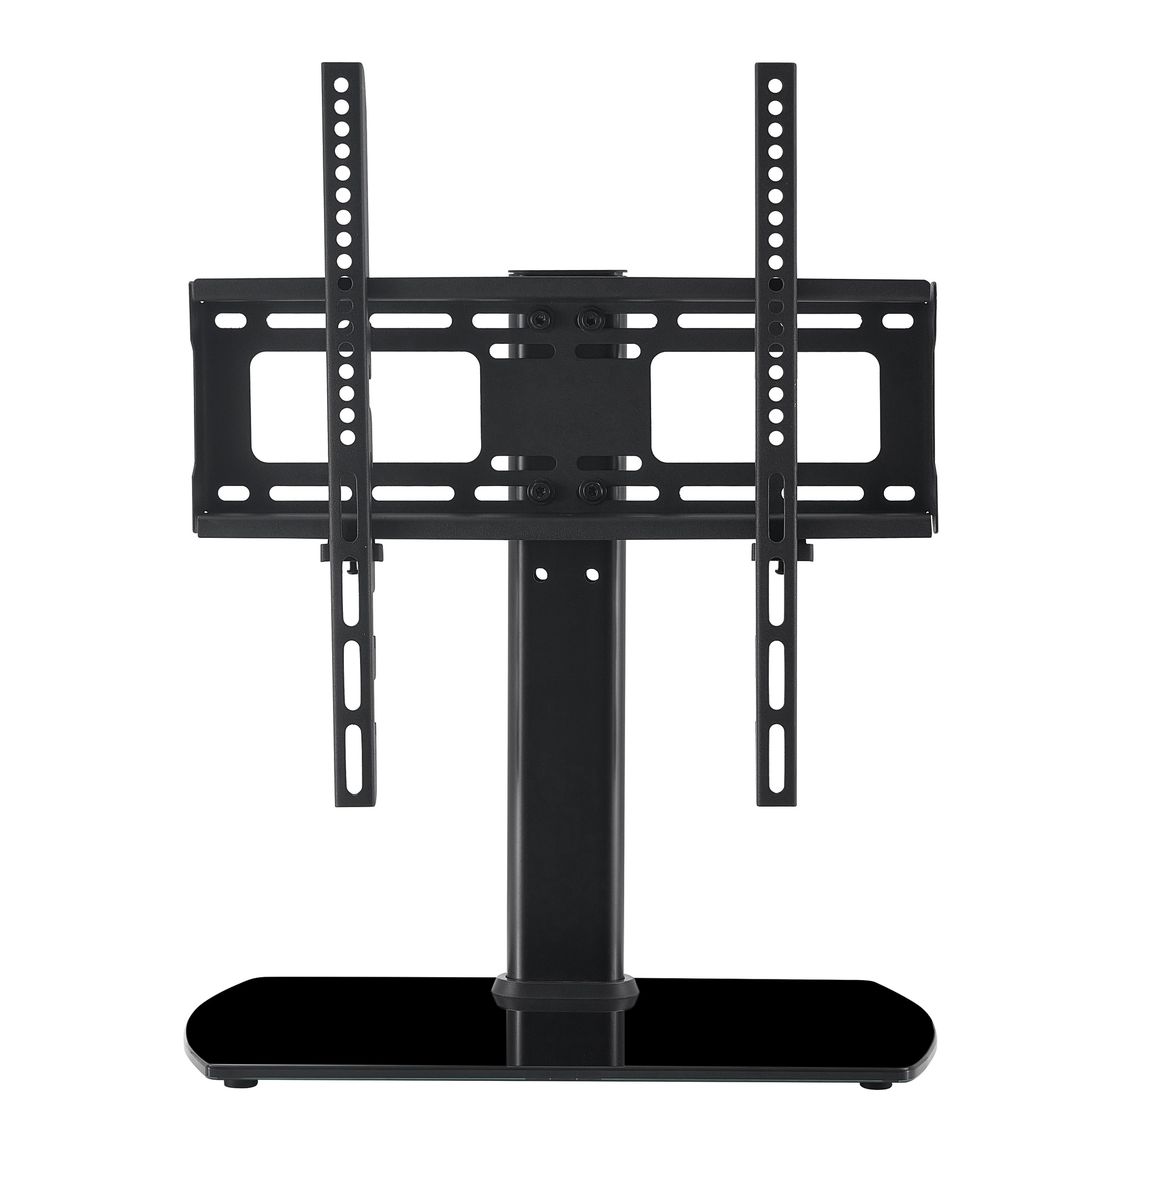 Mountright Universal Tabletop Tv Stand Pedestal Base For Size 26 40 Shop Today Get It